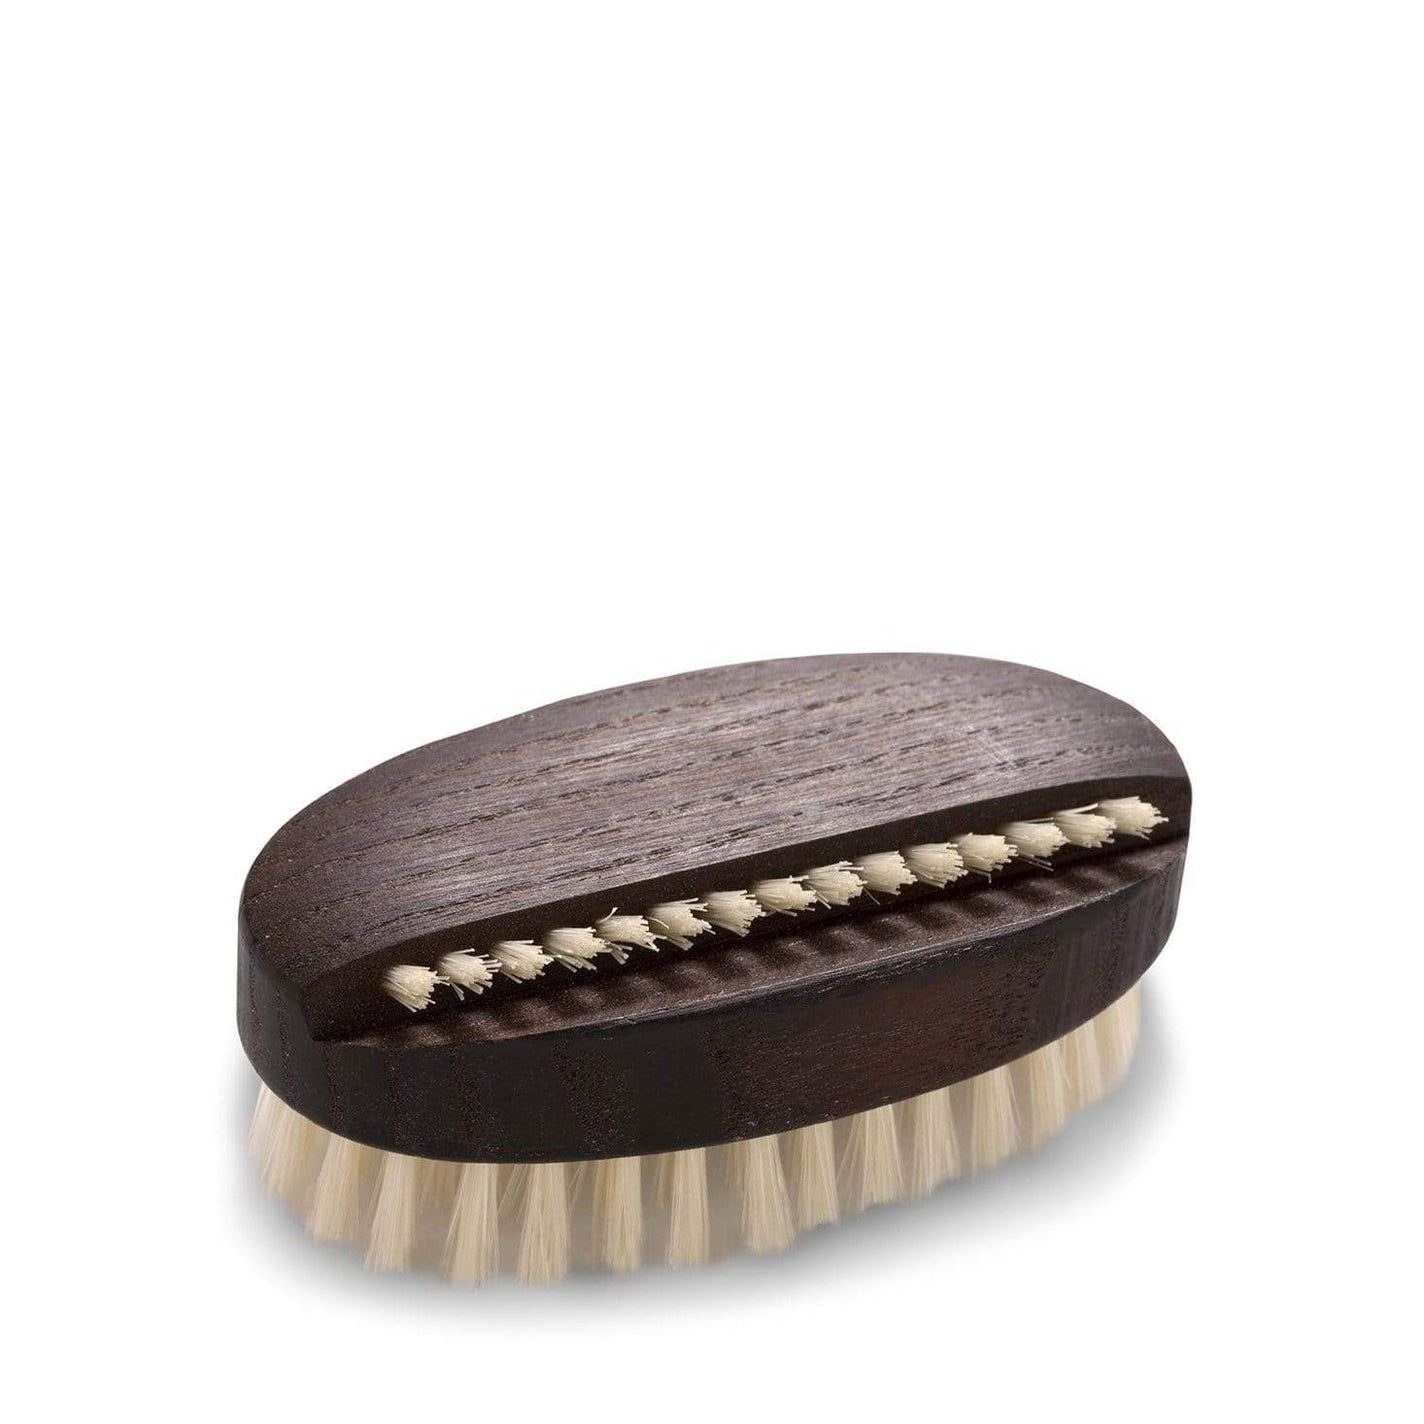 Redecker Thermowood Oval Nail Brush